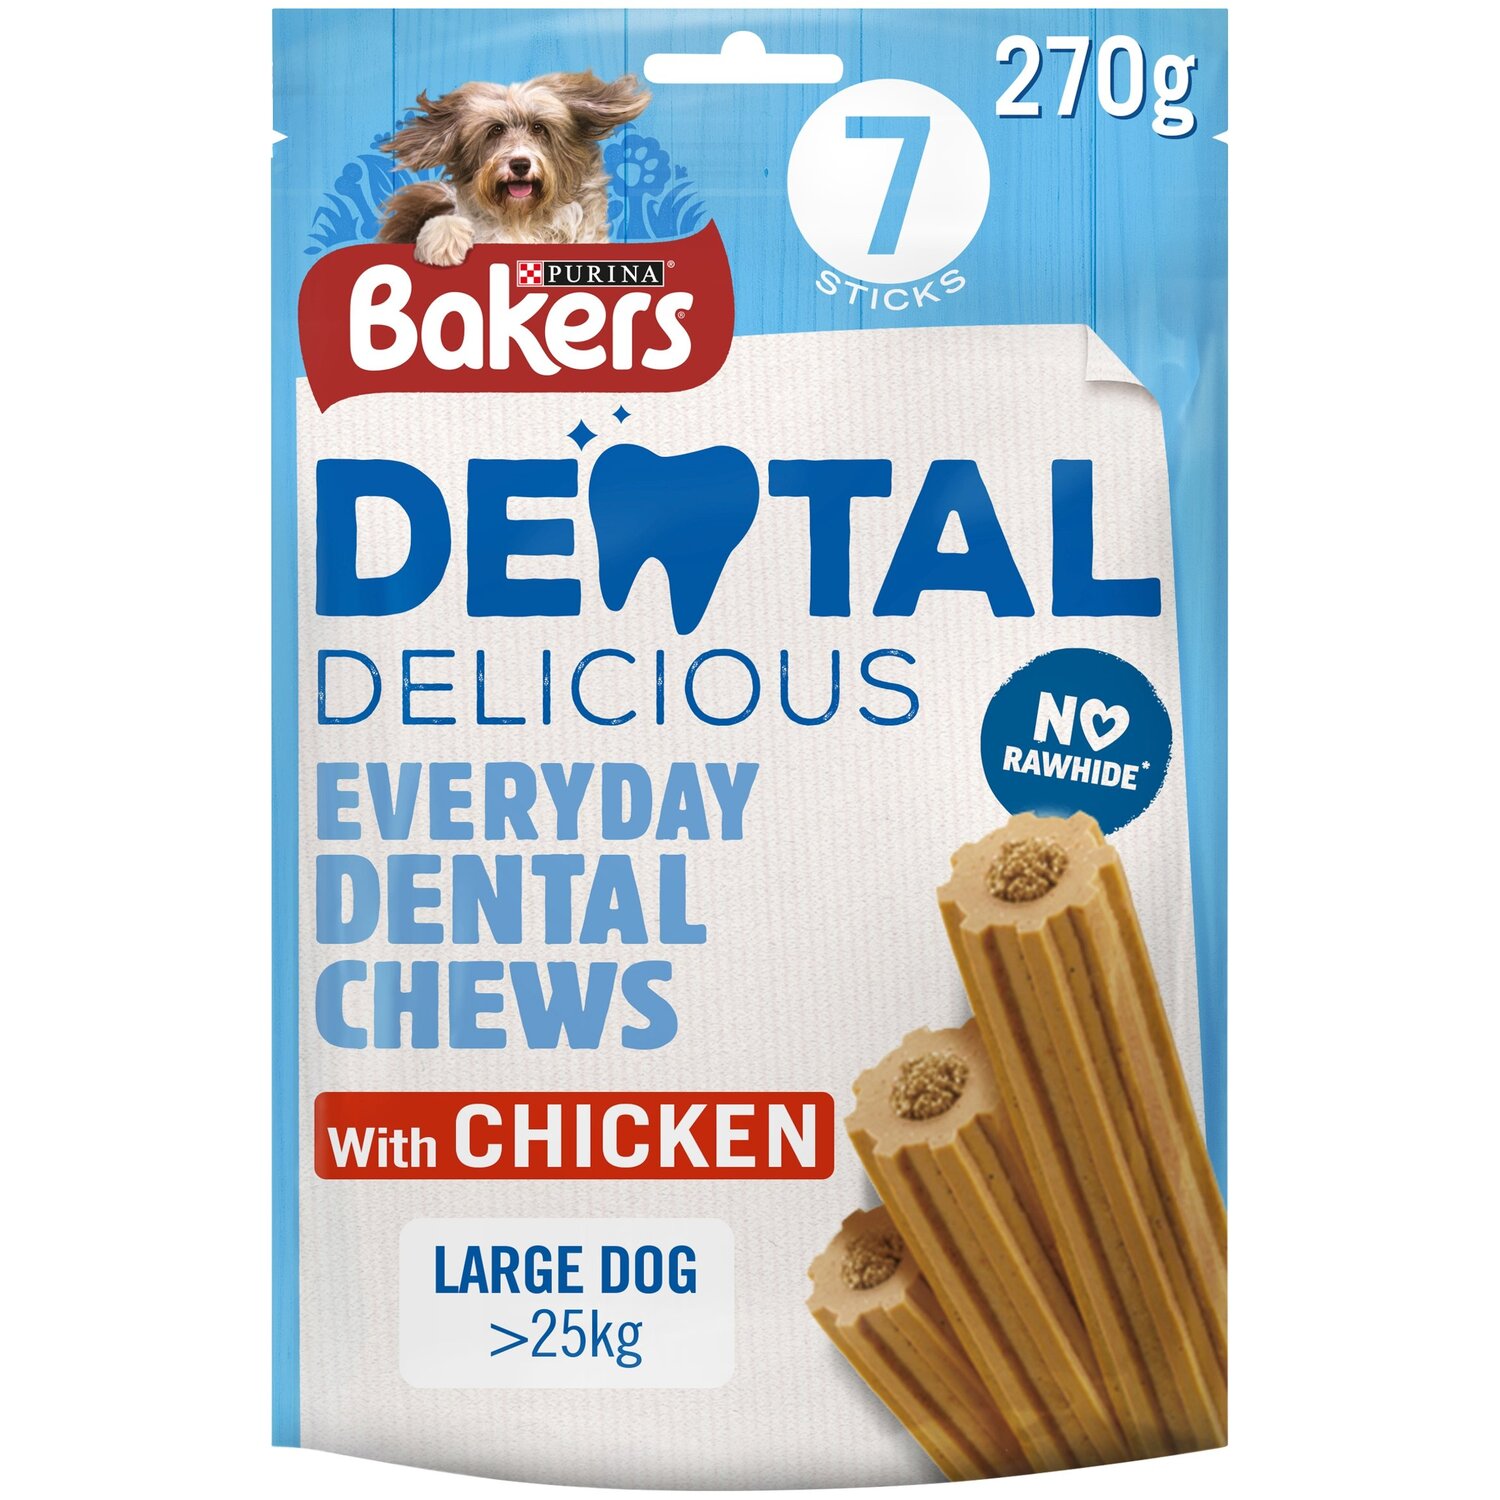 Purina Bakers Delicious Chicken Dental Chews Dog Treat 270g Image 1